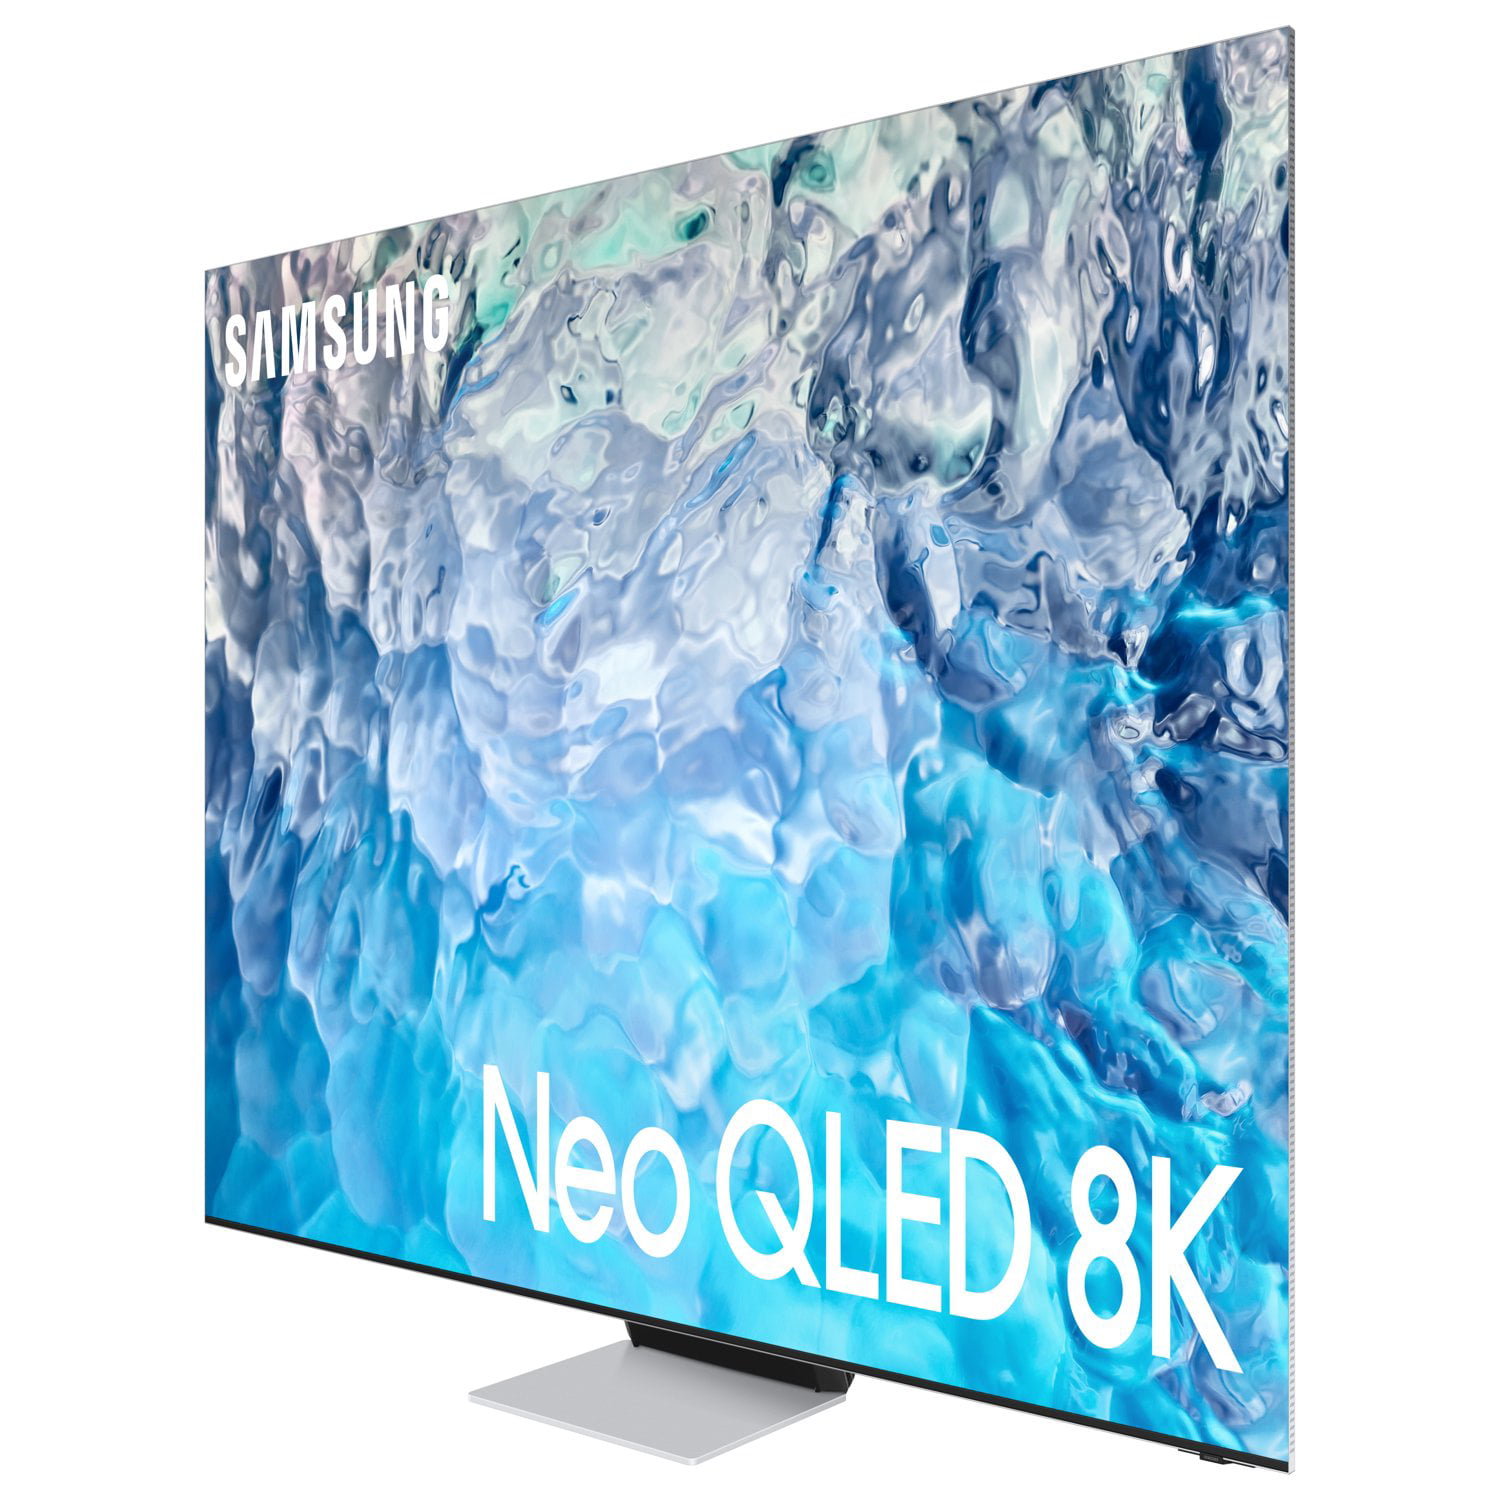 Samsung's 85-inch Q900R 8K QLED Now Available for Pre-Order